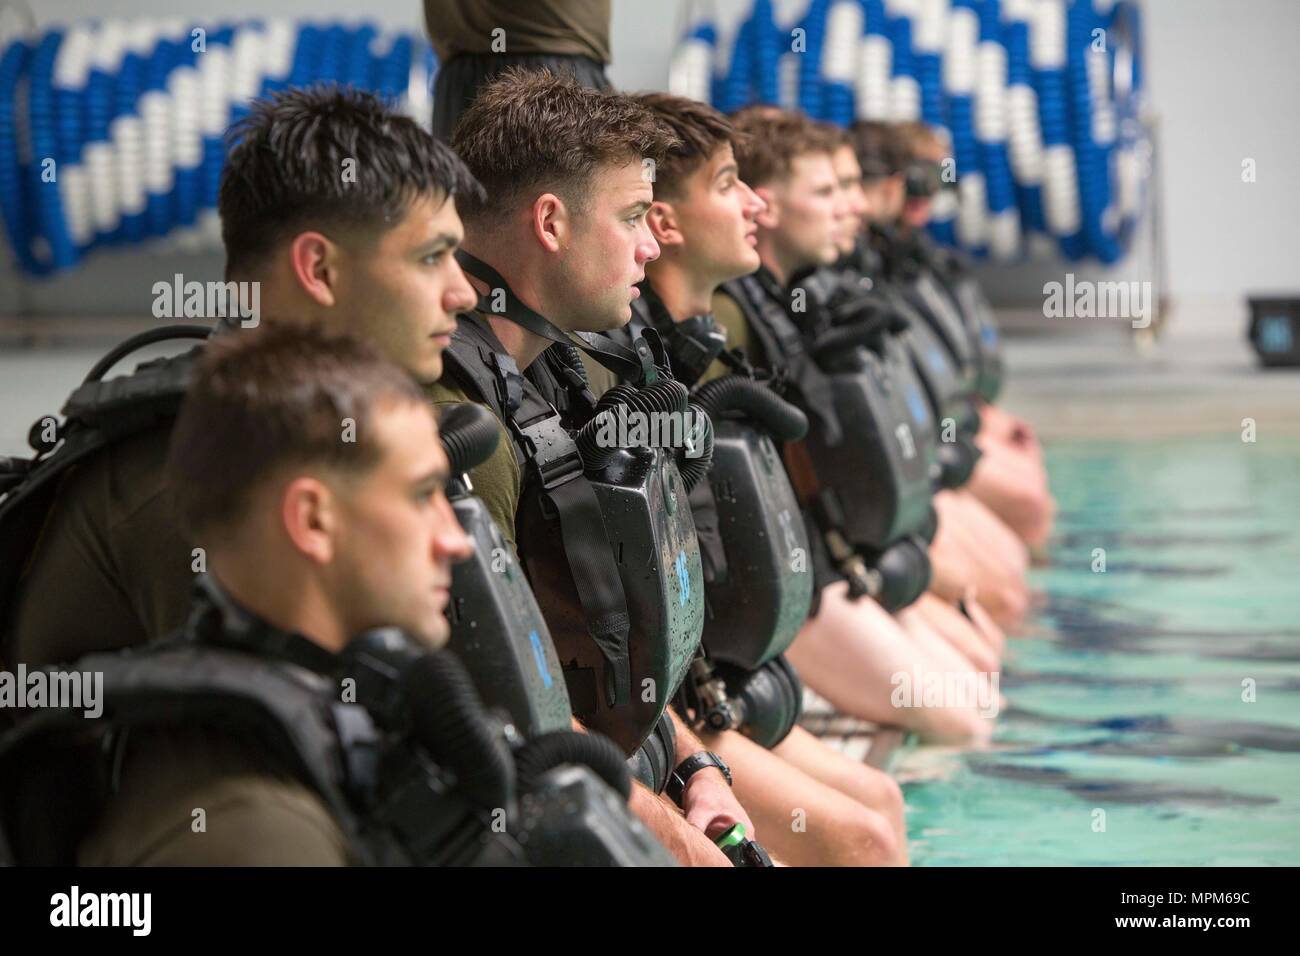 Marines await the command to enter the pool during a battalion training event at Camp Lejeune, N.C., March 23, 2017. The Marines conducted training with the MK-25 underwater breathing apparatus to maintain proficiency and confidence in their combat diving skills. The Marines are with 2nd Reconnaissance Battalion, 2nd Marine Division. (U.S. Marine Corps photo by Sgt. Clemente C. Garcia) Stock Photo